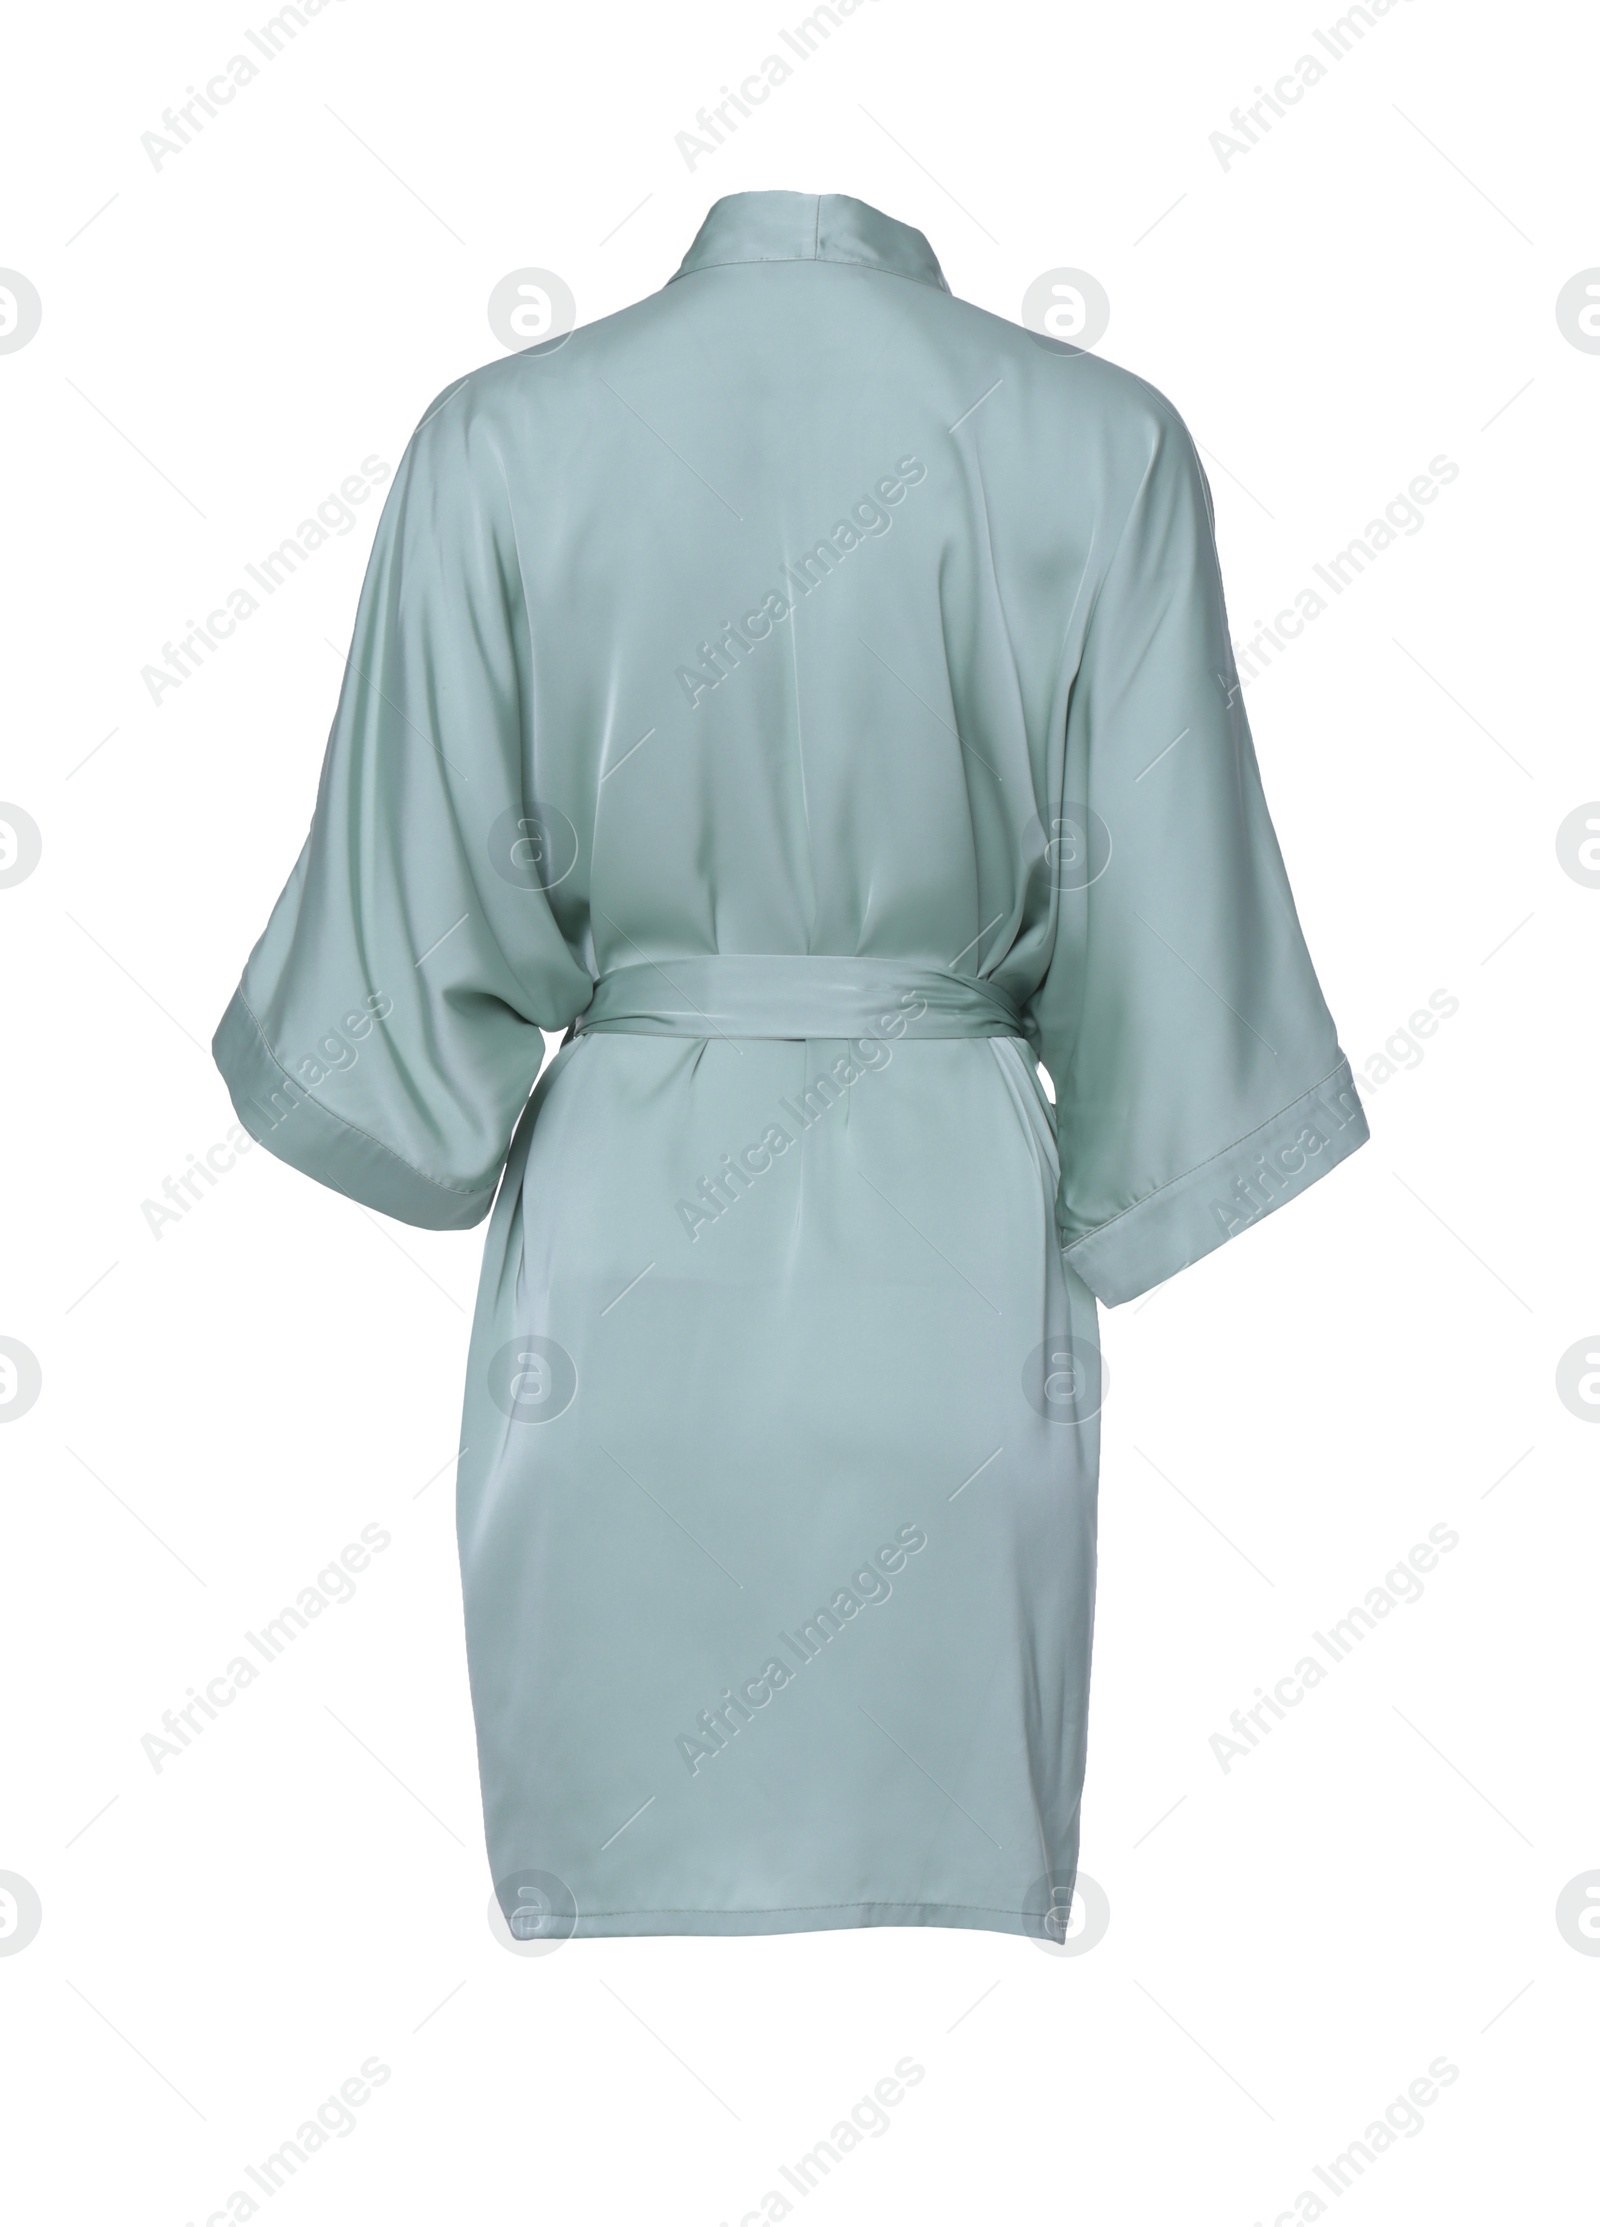 Image of Pale green silk bathrobe isolated on white, back view